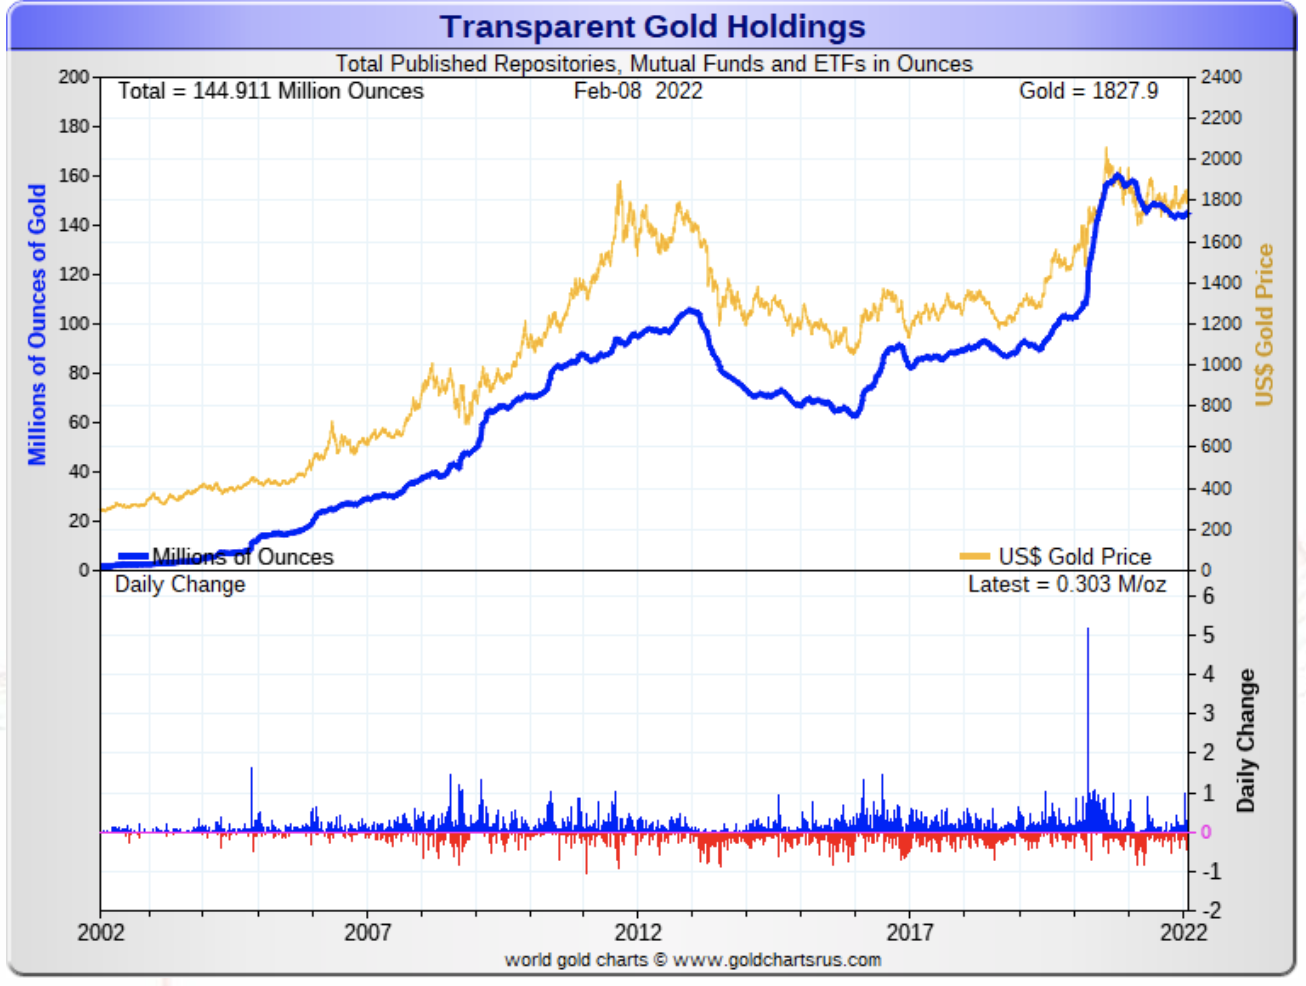 Overlay chart showing ETF flows and gold price since 2002